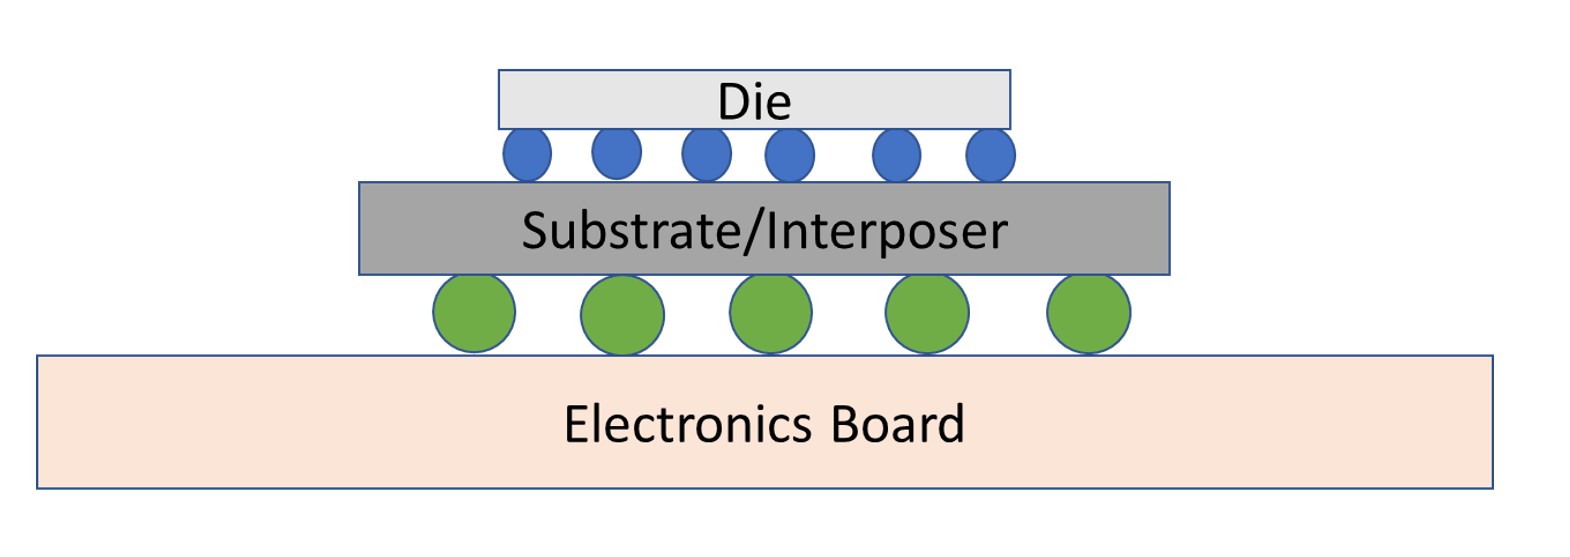 Fig. 4: Conceptual diagram of flip-chip packaging. Source: A. Meixner/Semiconductor Engineering